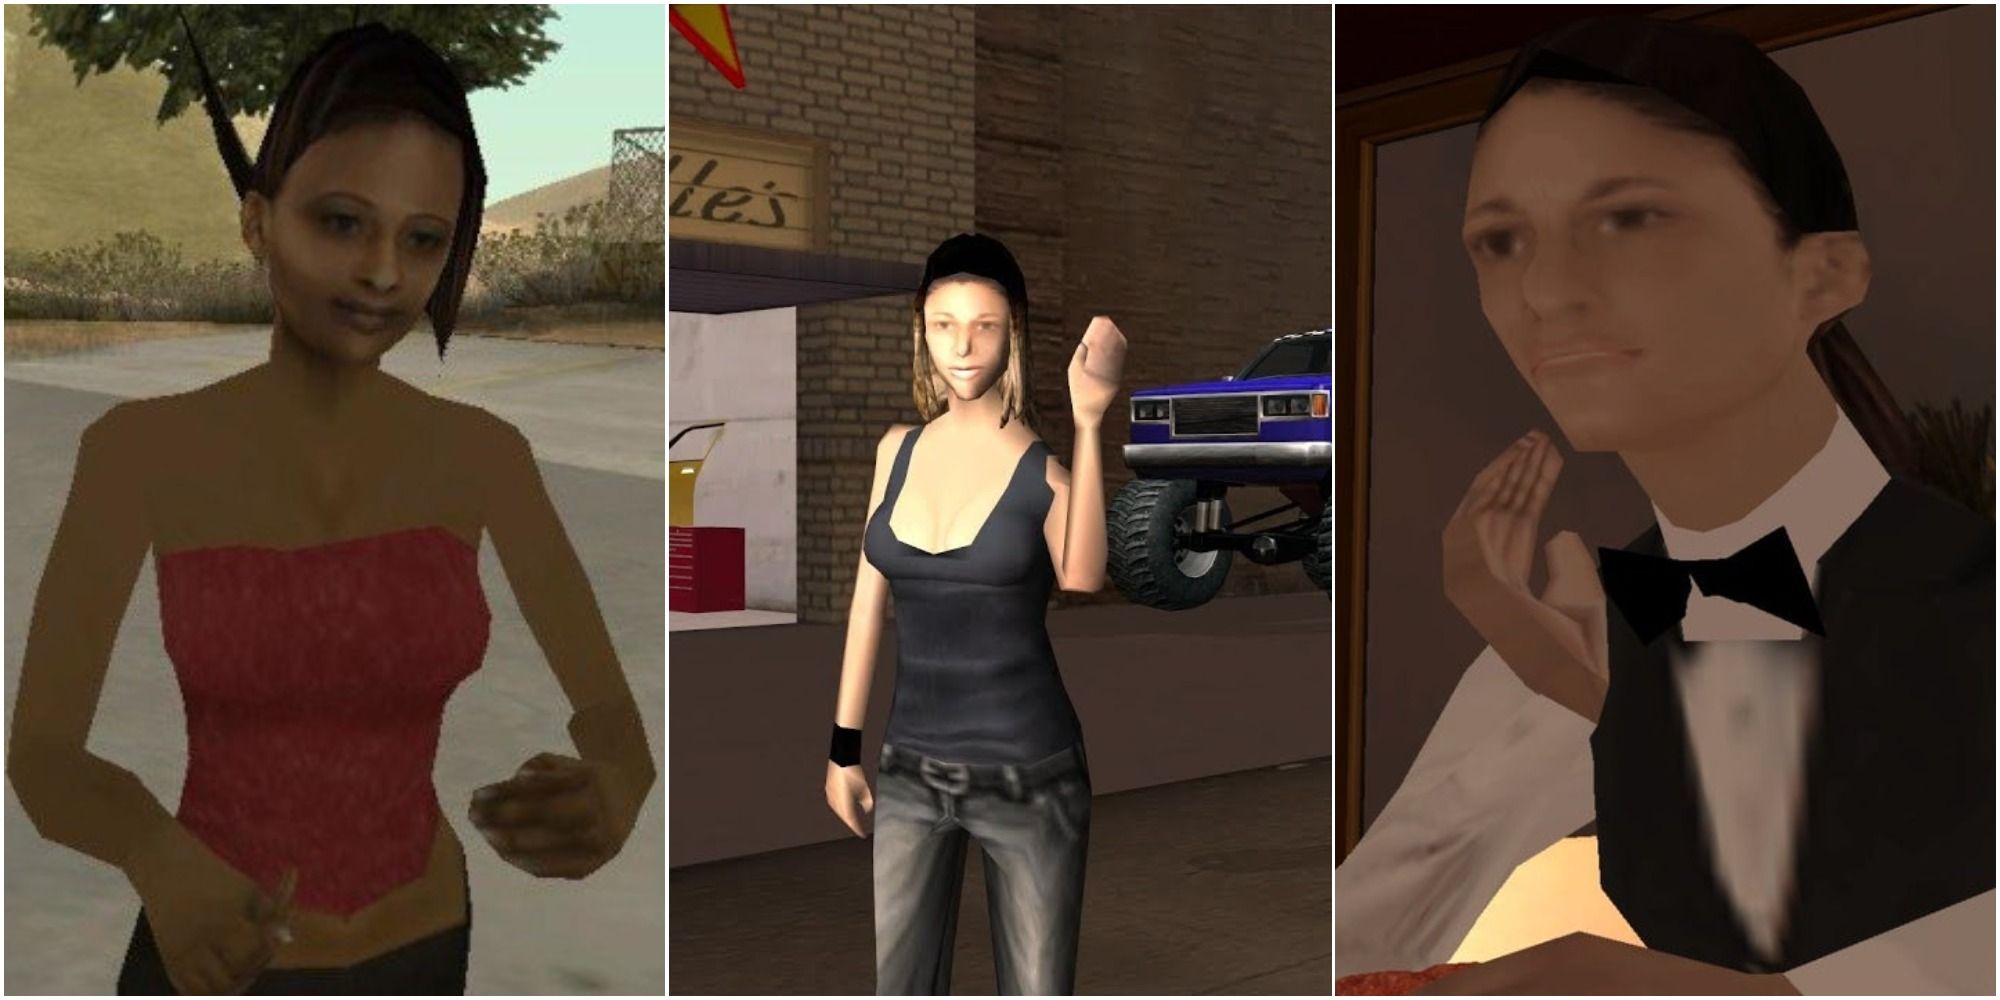 How to date barbara in gta san andreas pc